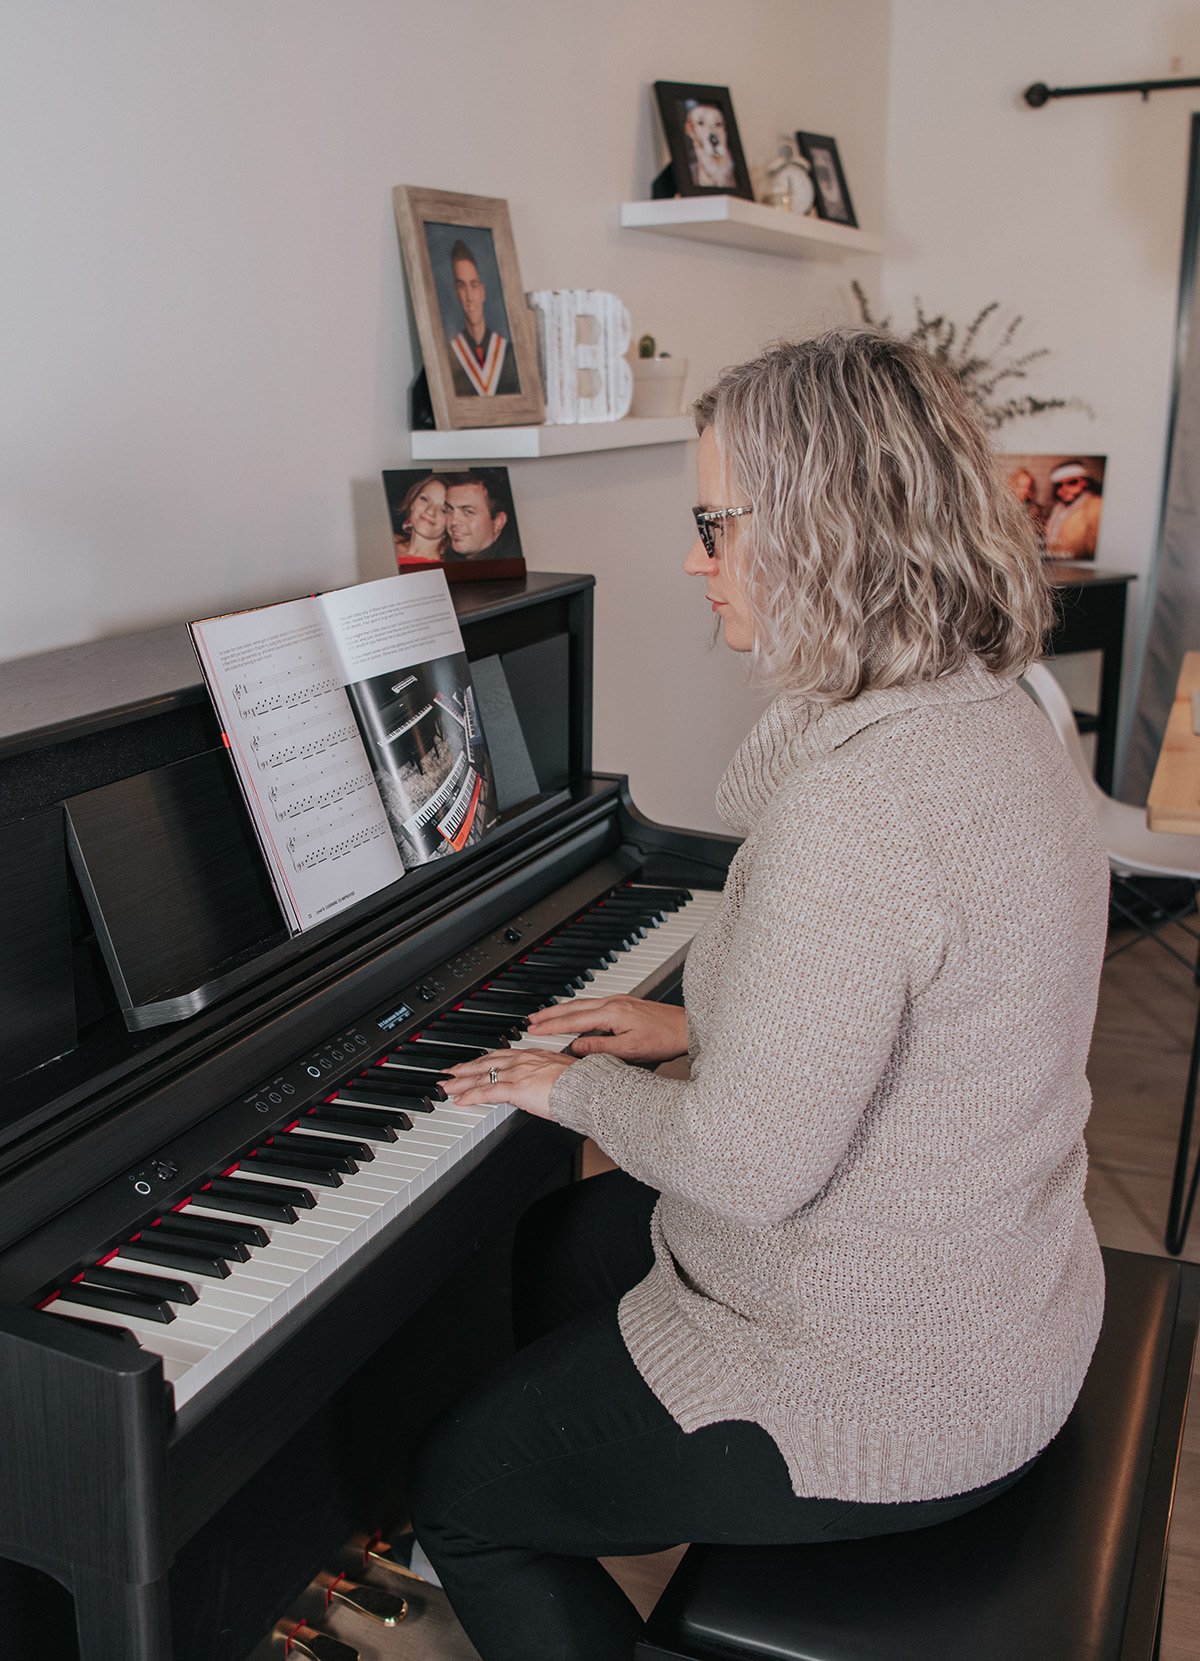 Piano practice motivation. Woman with glasses in beige sweater playing upright digital piano in home.